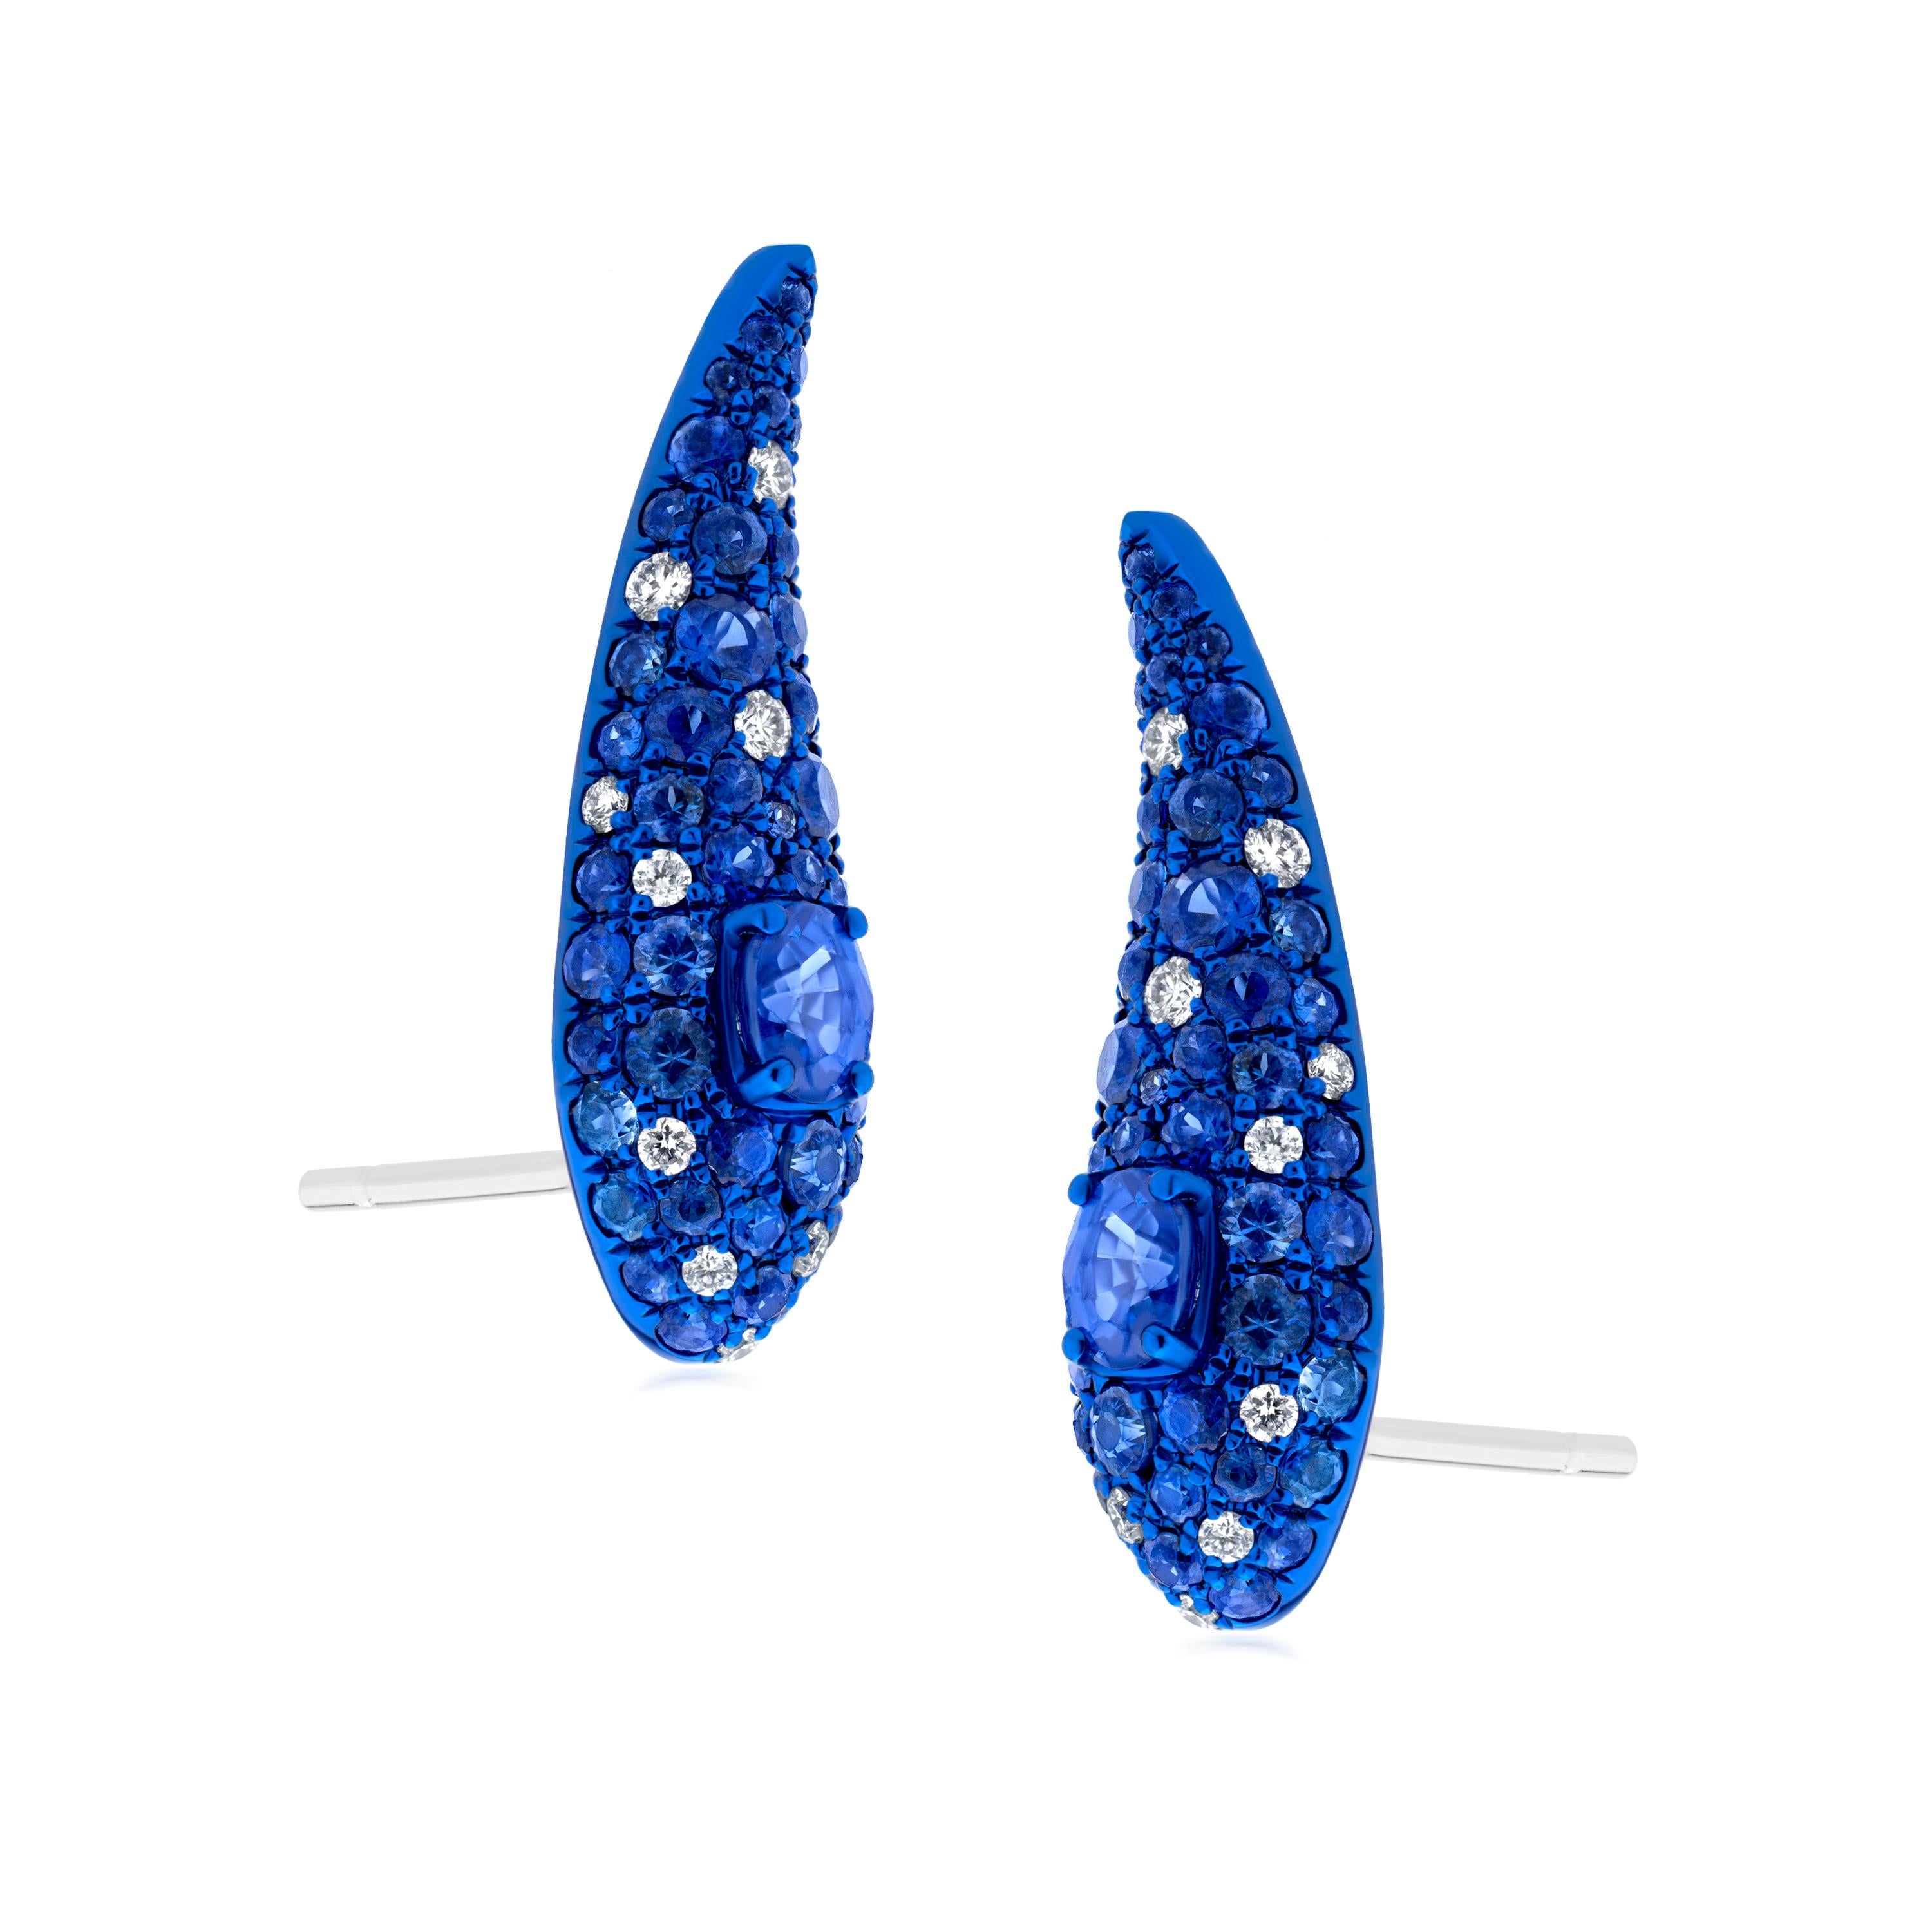 Elevate your style with the captivating allure of the Gemistry 2.40Cttw. Sapphire and Diamond Serpentine Ear Climber in 18k Gold and Blue Rhodium. This exquisite piece is a true testament to the artistry and craftsmanship of fine jewelry.

At its